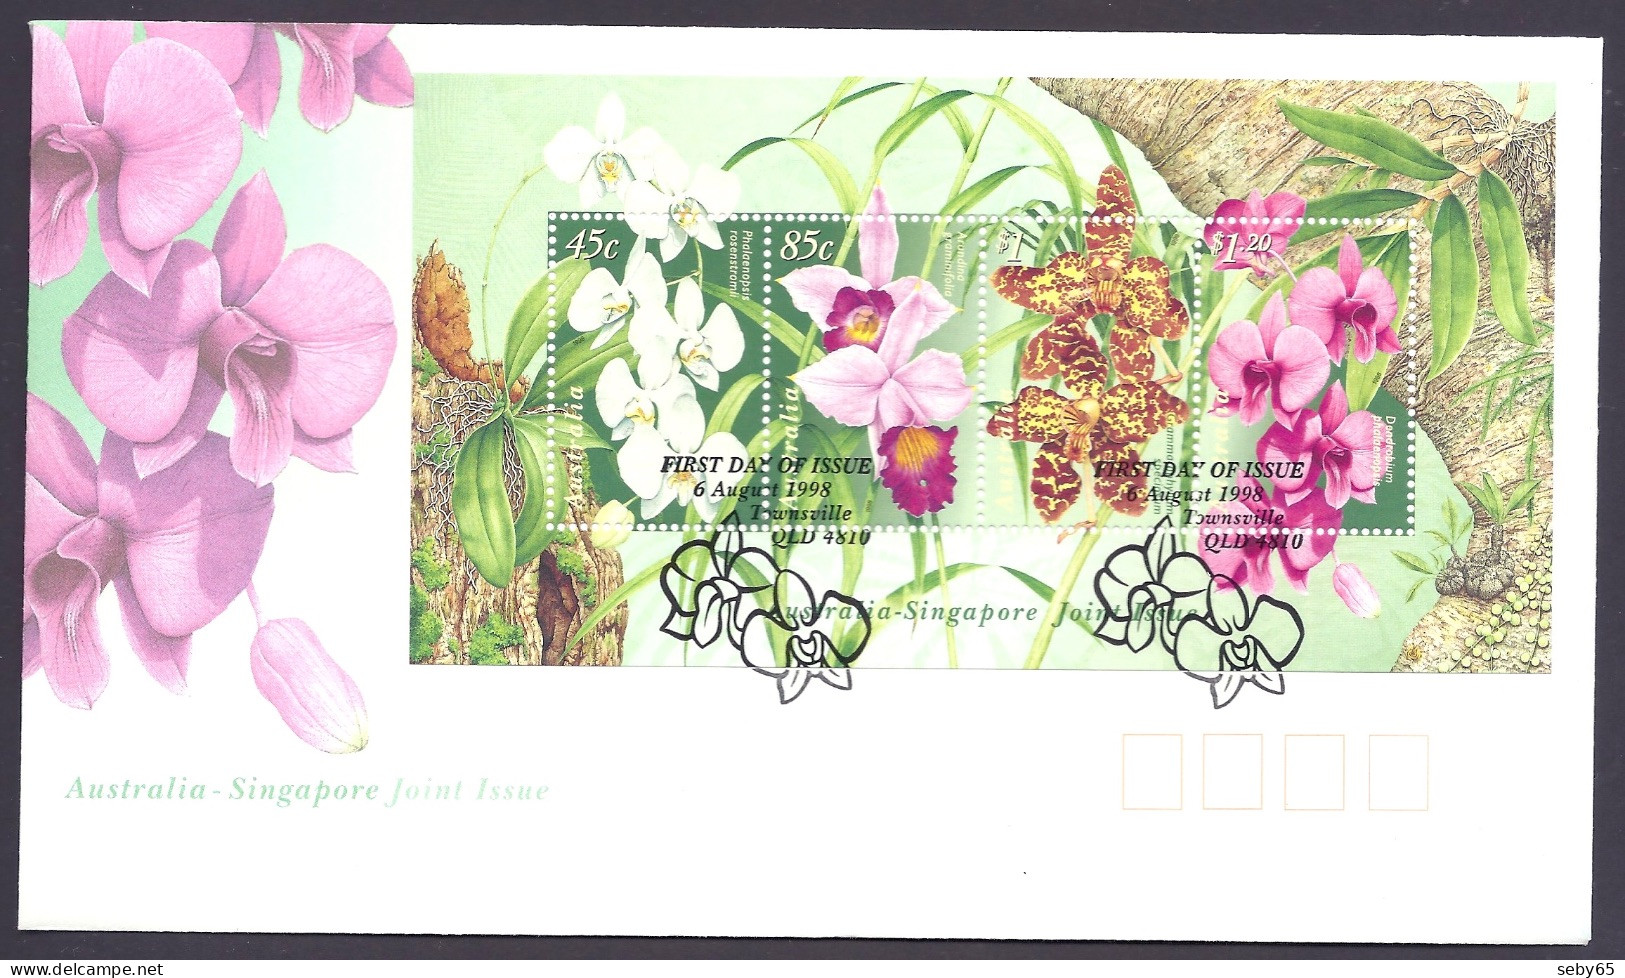 Australia 1998 - Flora, Flowers, Native Orchids, Orchid, Joint Issue With Singapore - Miniature Sheet FDC - Premiers Jours (FDC)